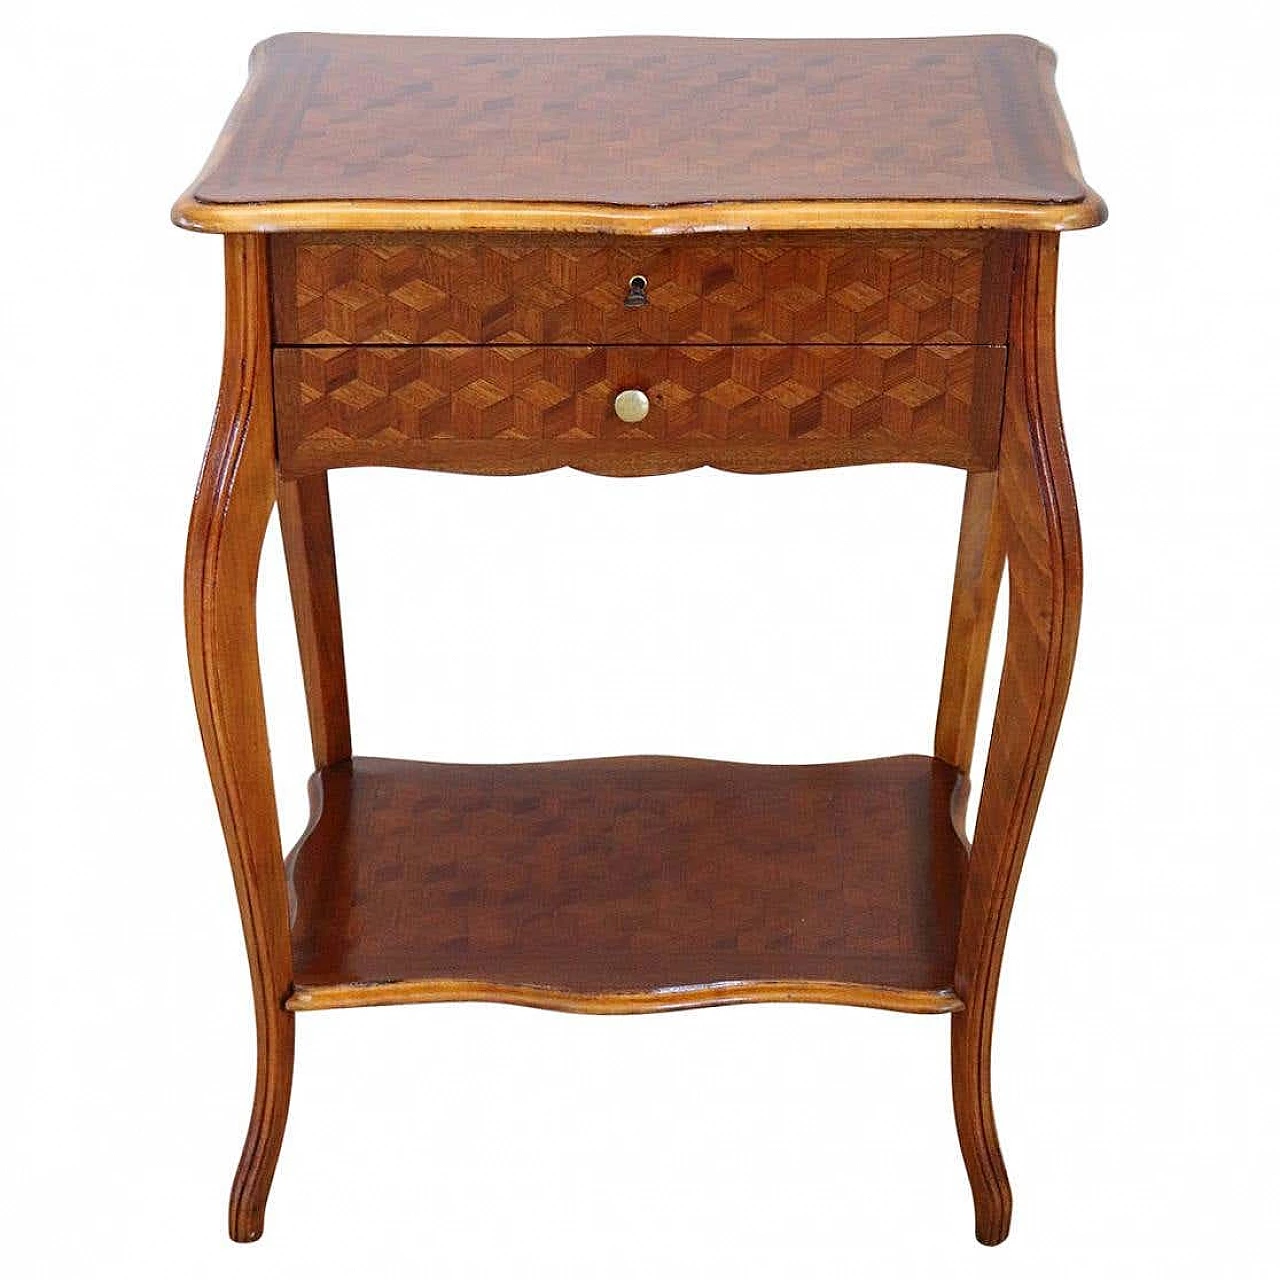 Inlaid walnut small table with mirror, early 20th century 1290147